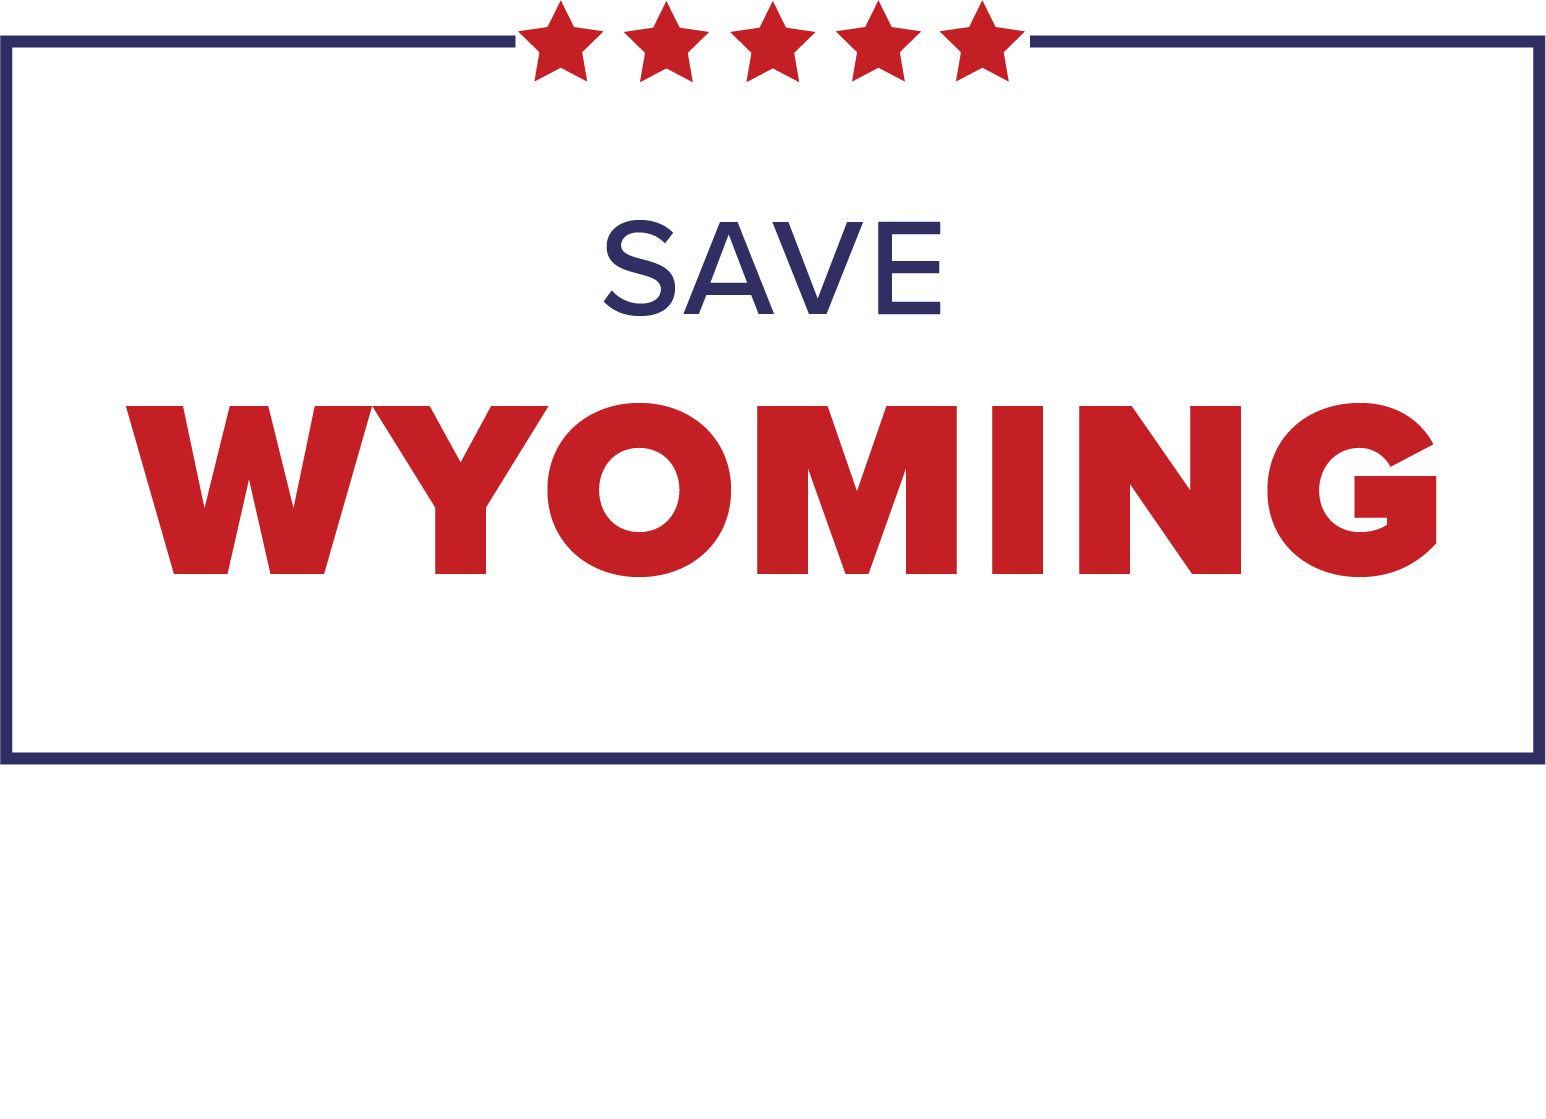 Save wyoming with starts